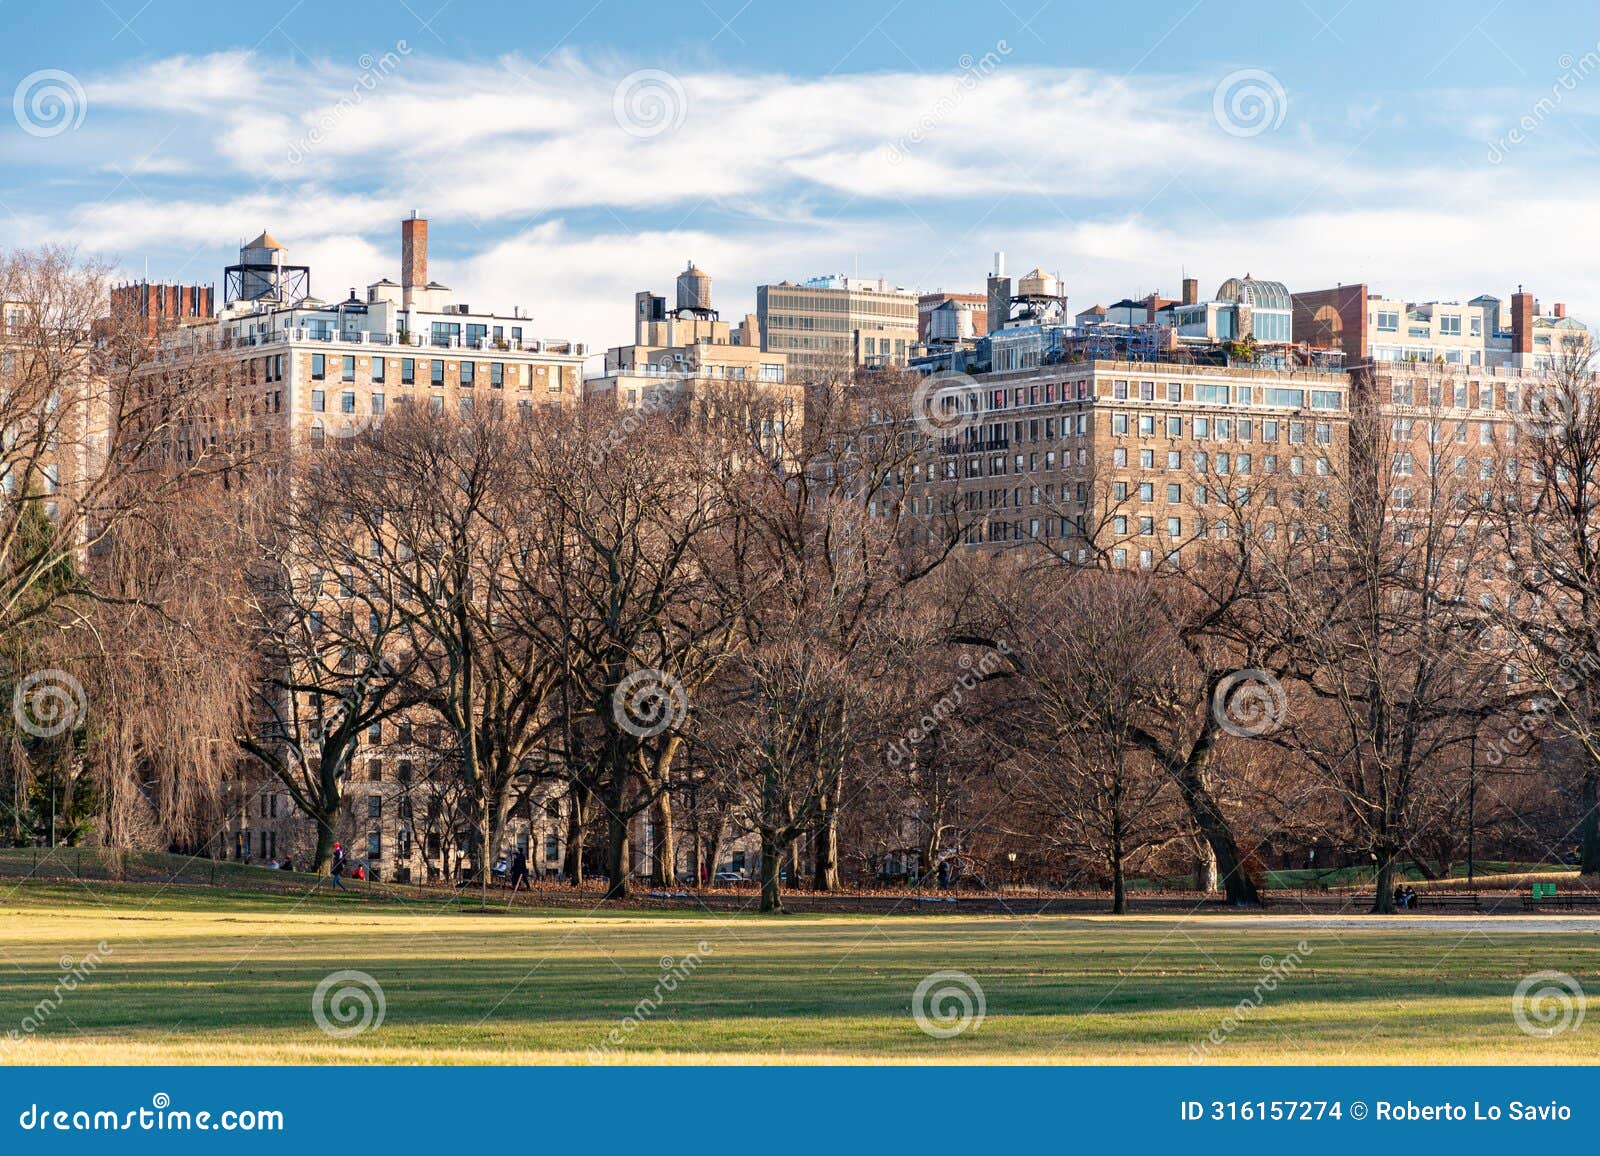 Winter View of Central Park with Buildings of East Harlem in the ...